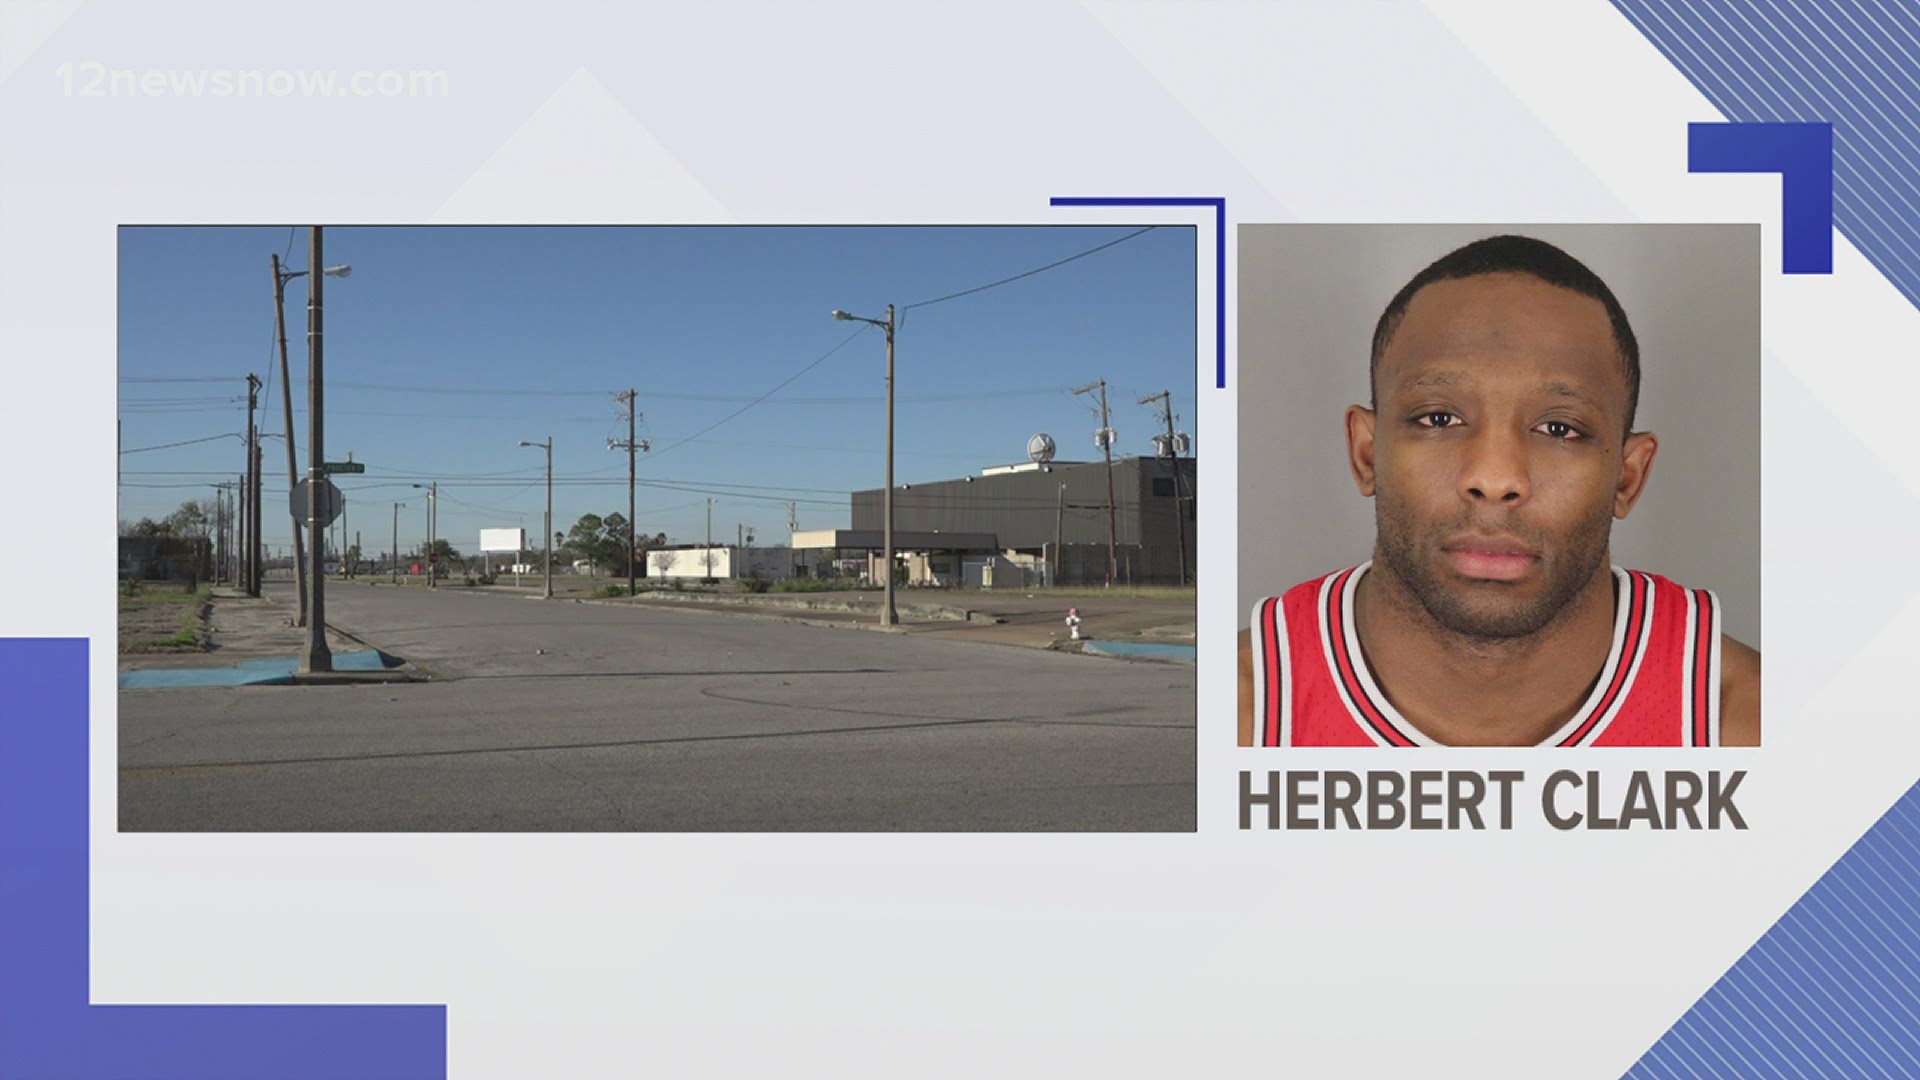 Herbert Clark was arrested in Dallas after he was arrested for unrelated charges. Investigators said that's when they linked him to the murder.